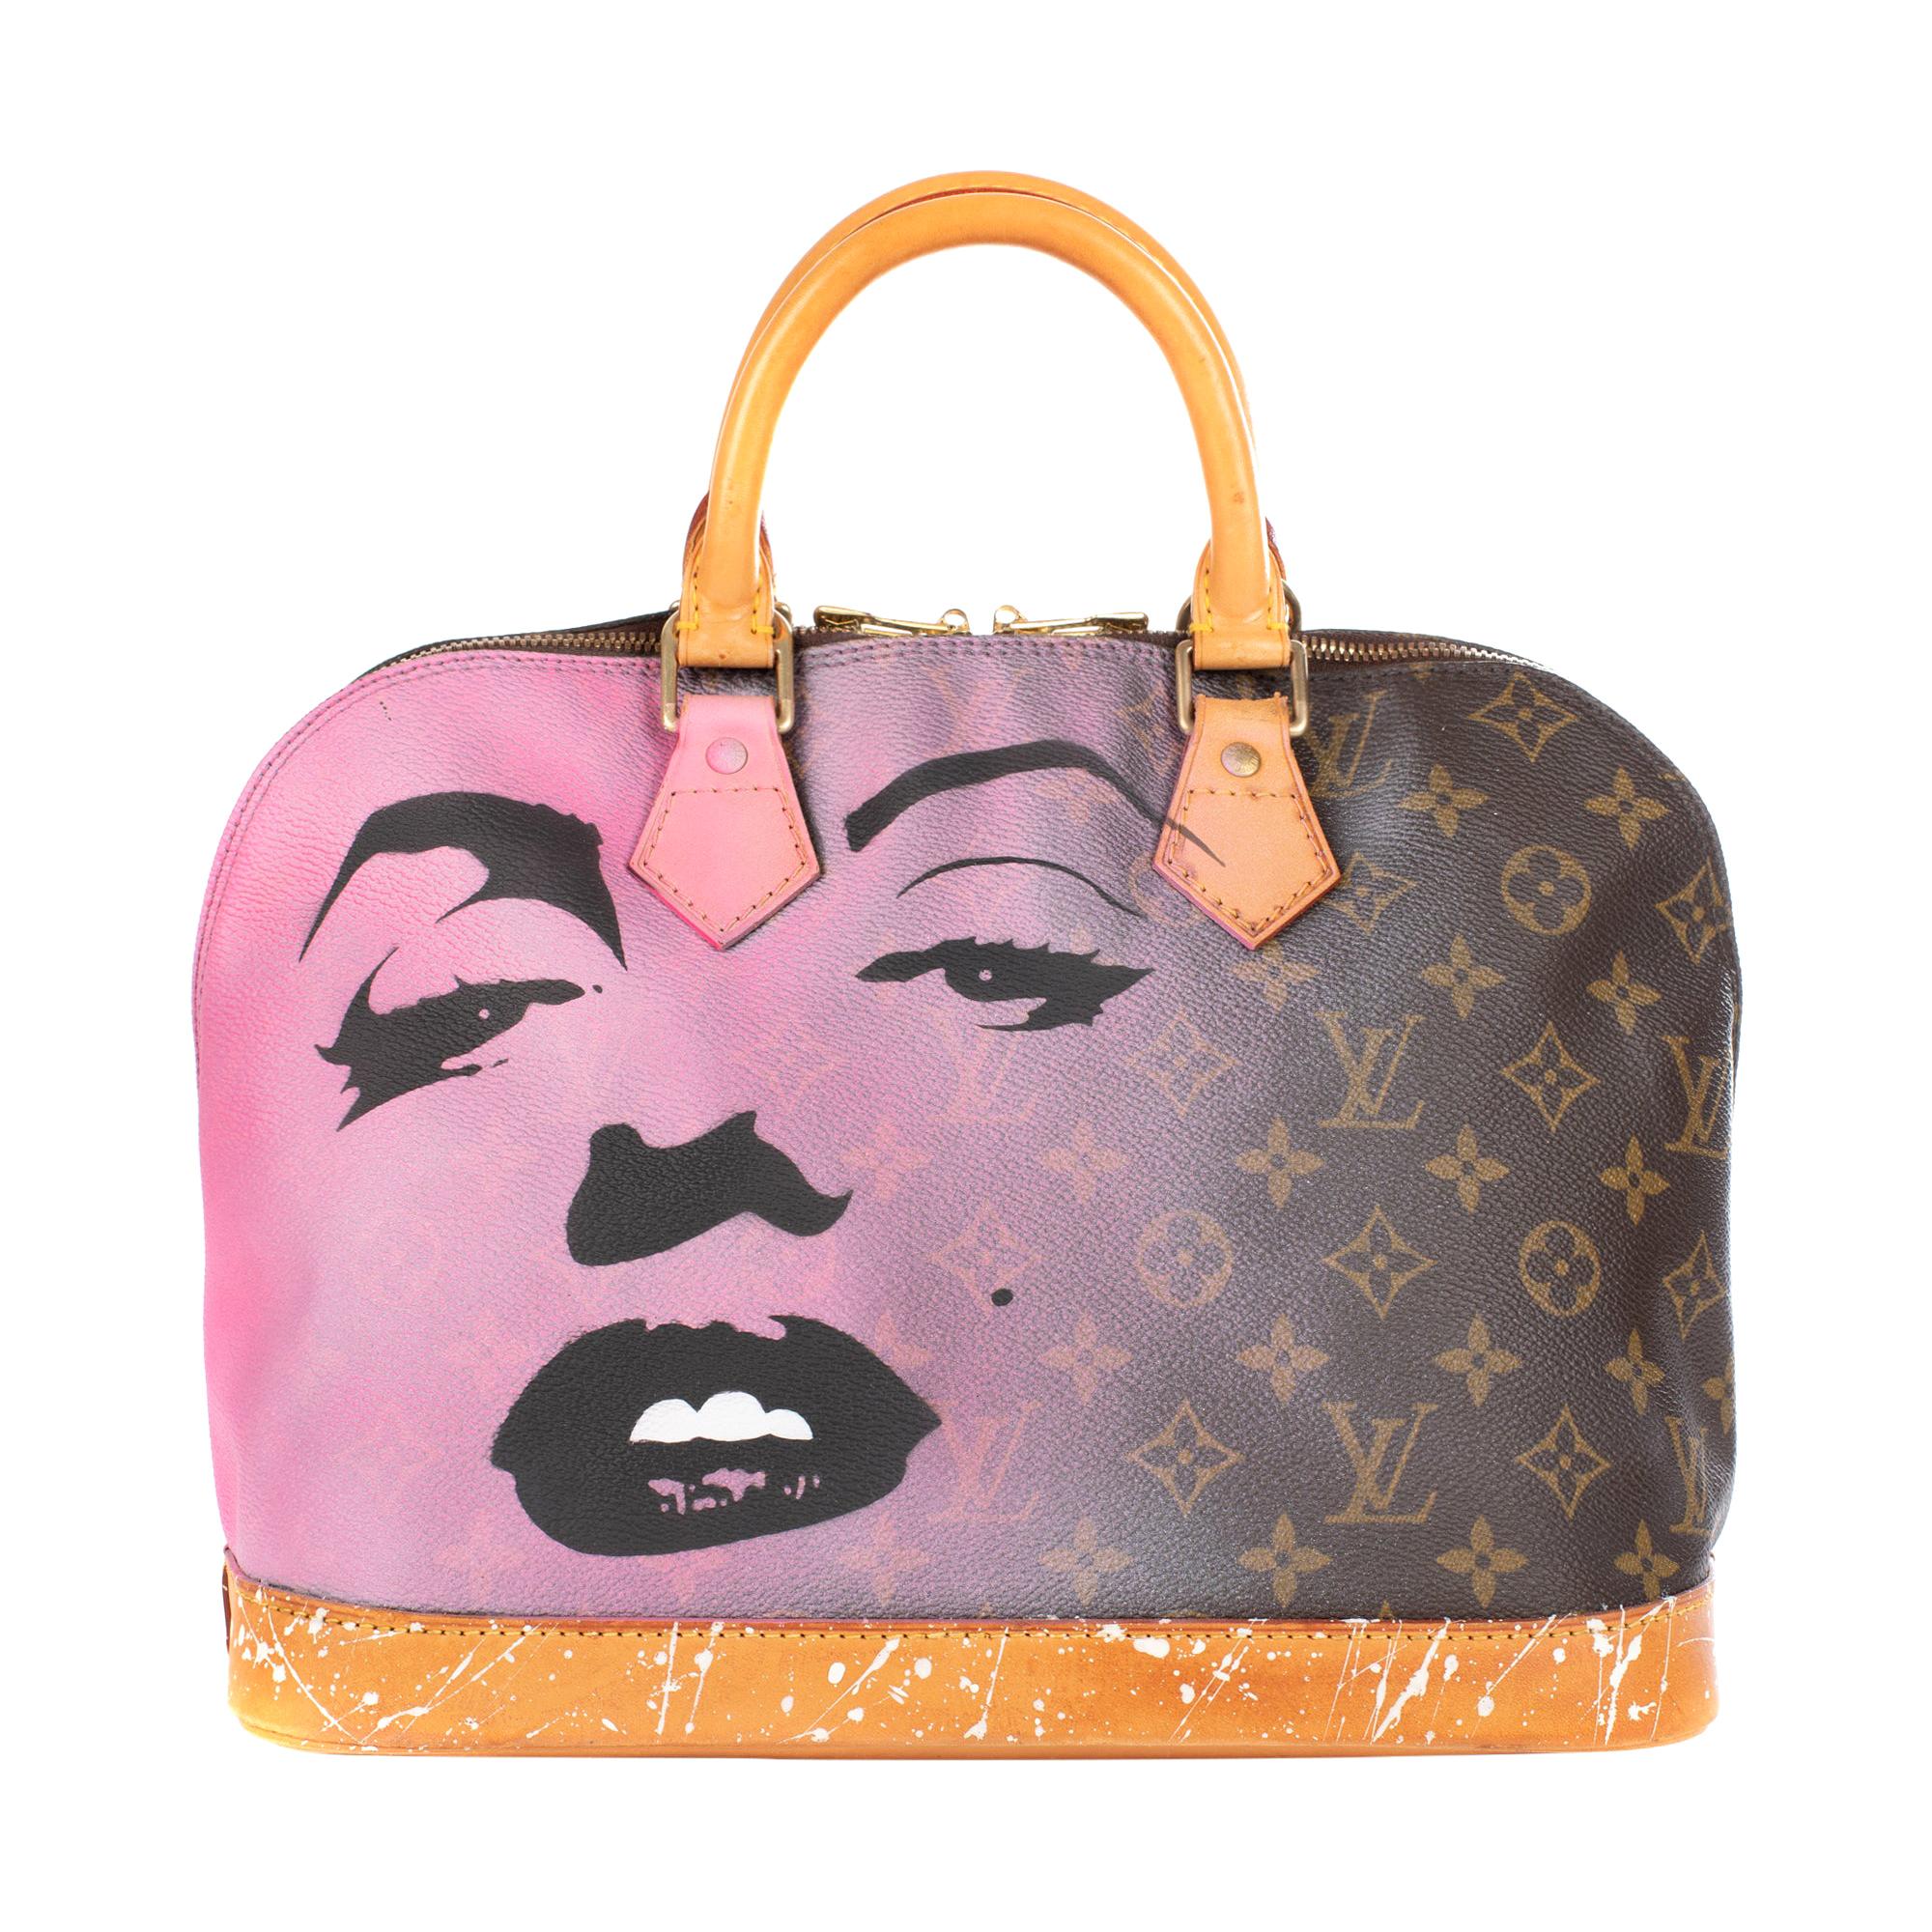 Louis Vuitton Alma Monogram customized "Marilyn for Ever" by the artist PatBo !